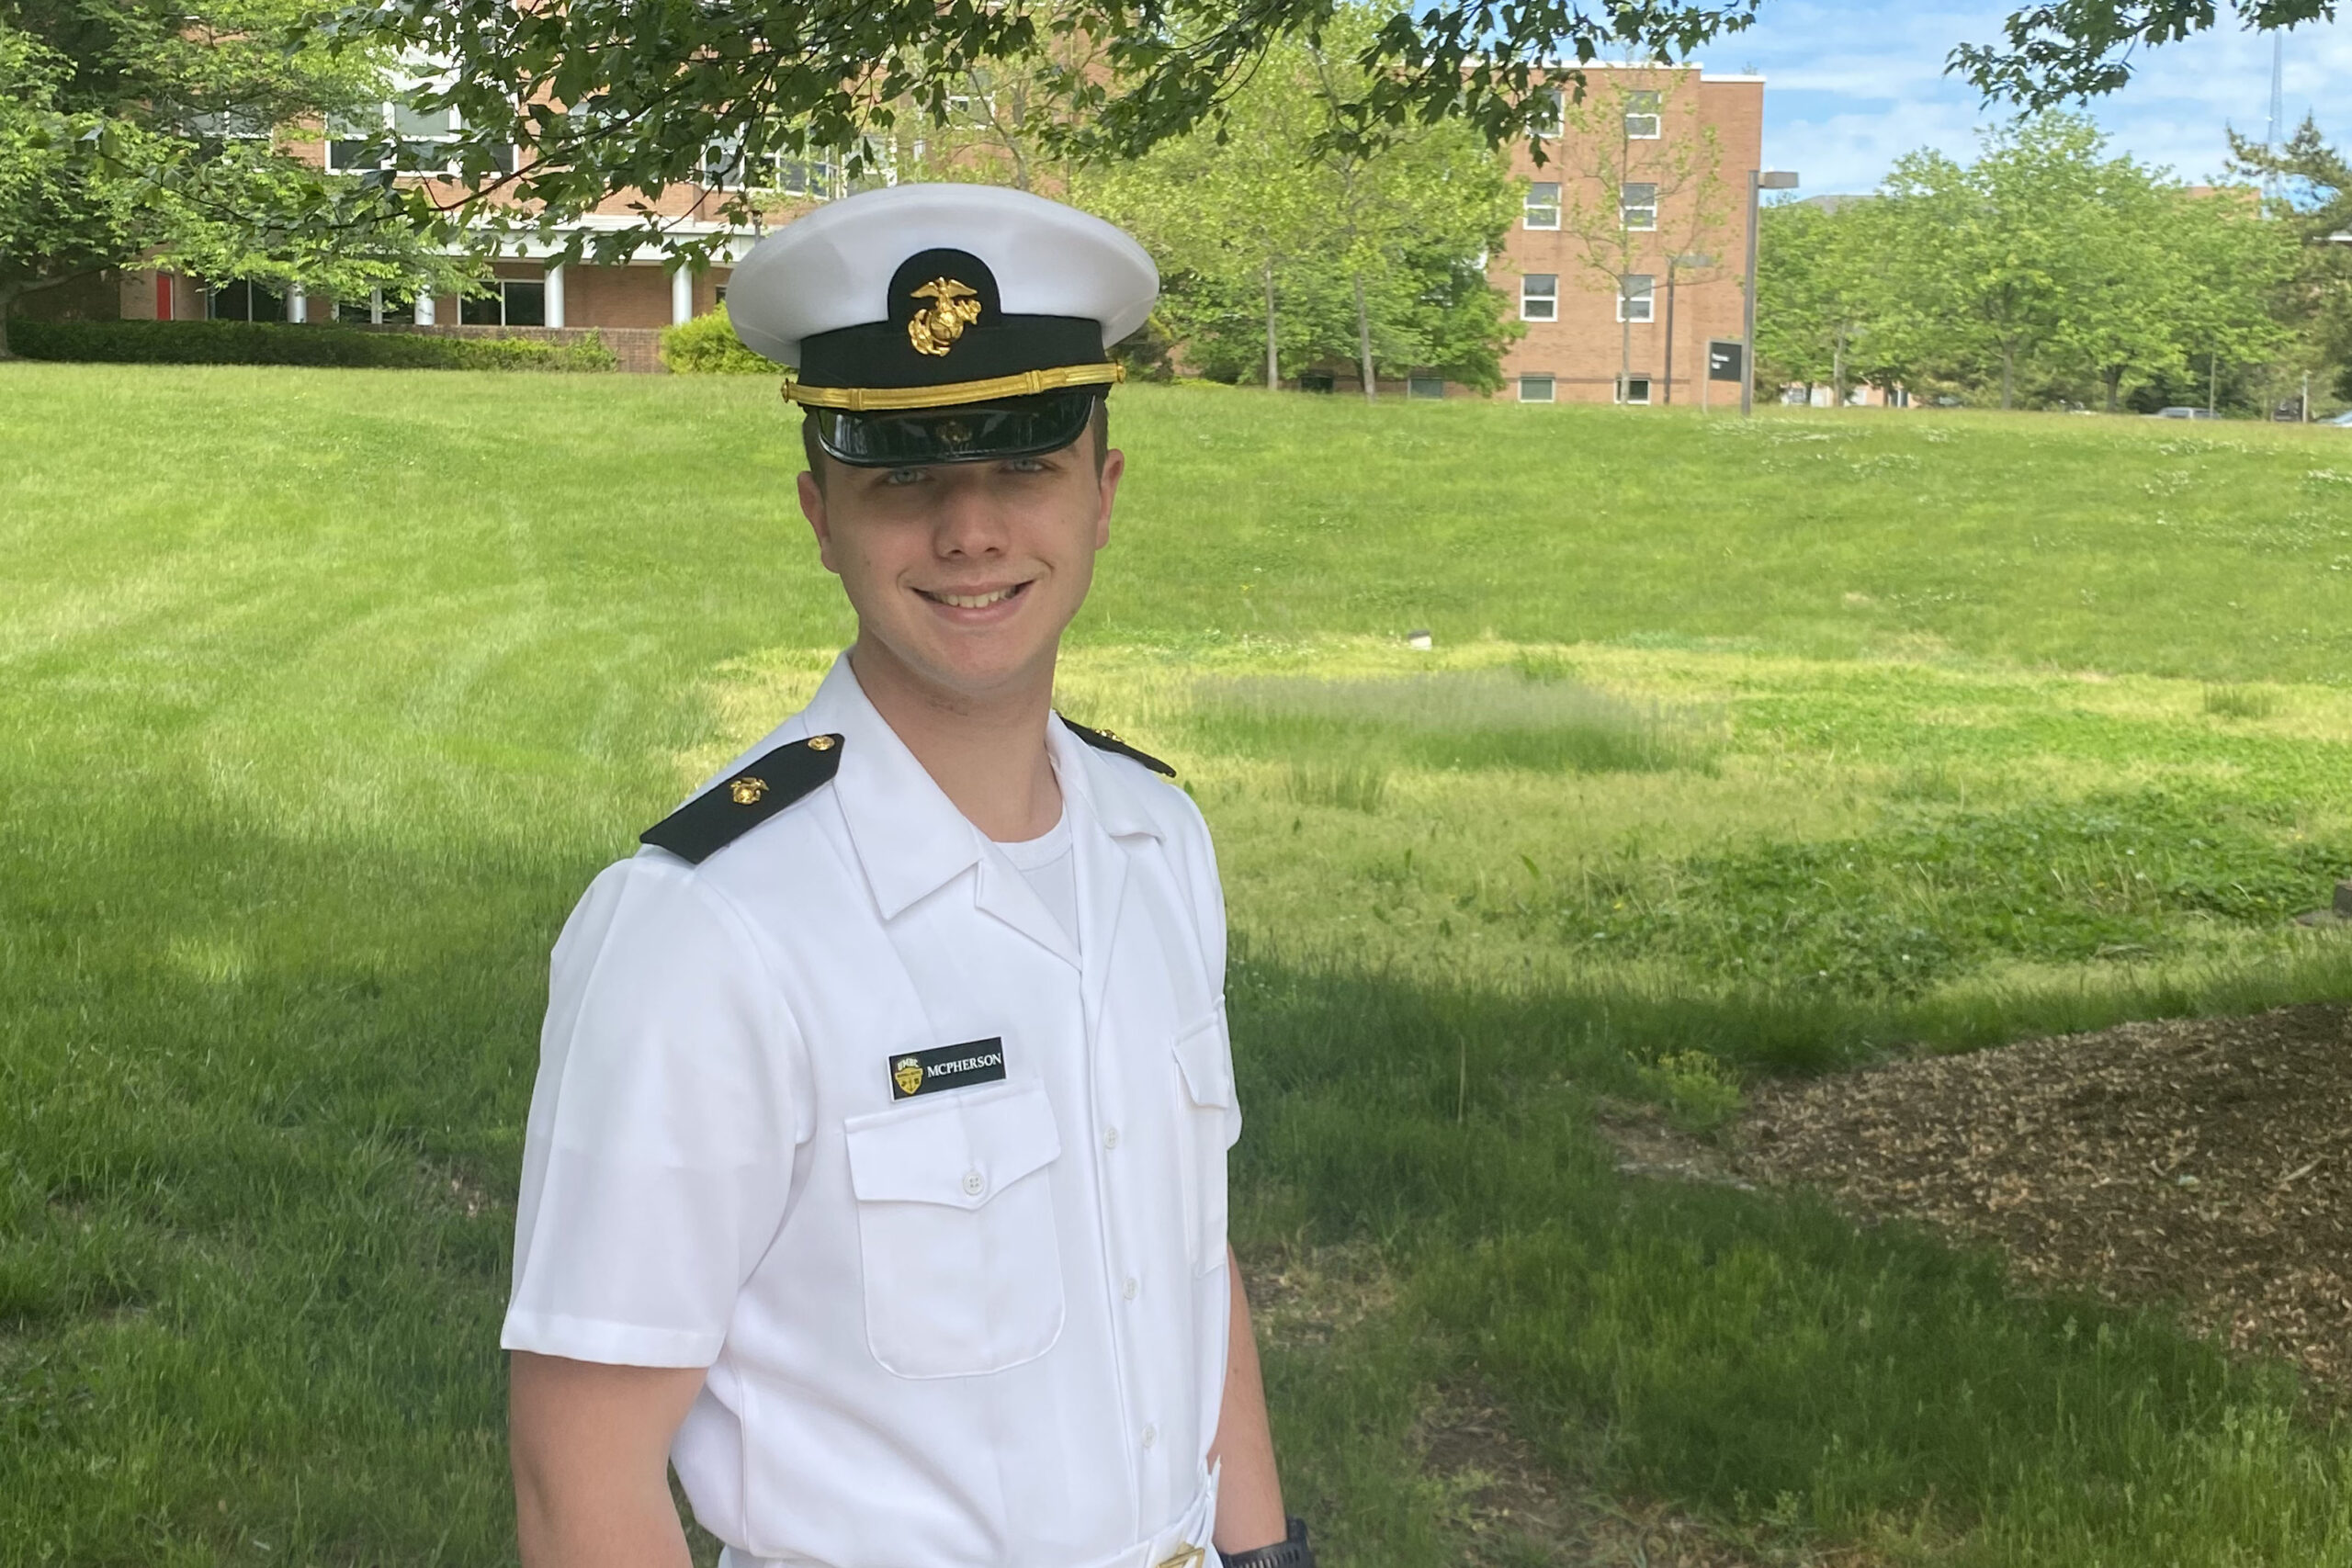 NROTC grad brings passion for history to new role as Naval officer